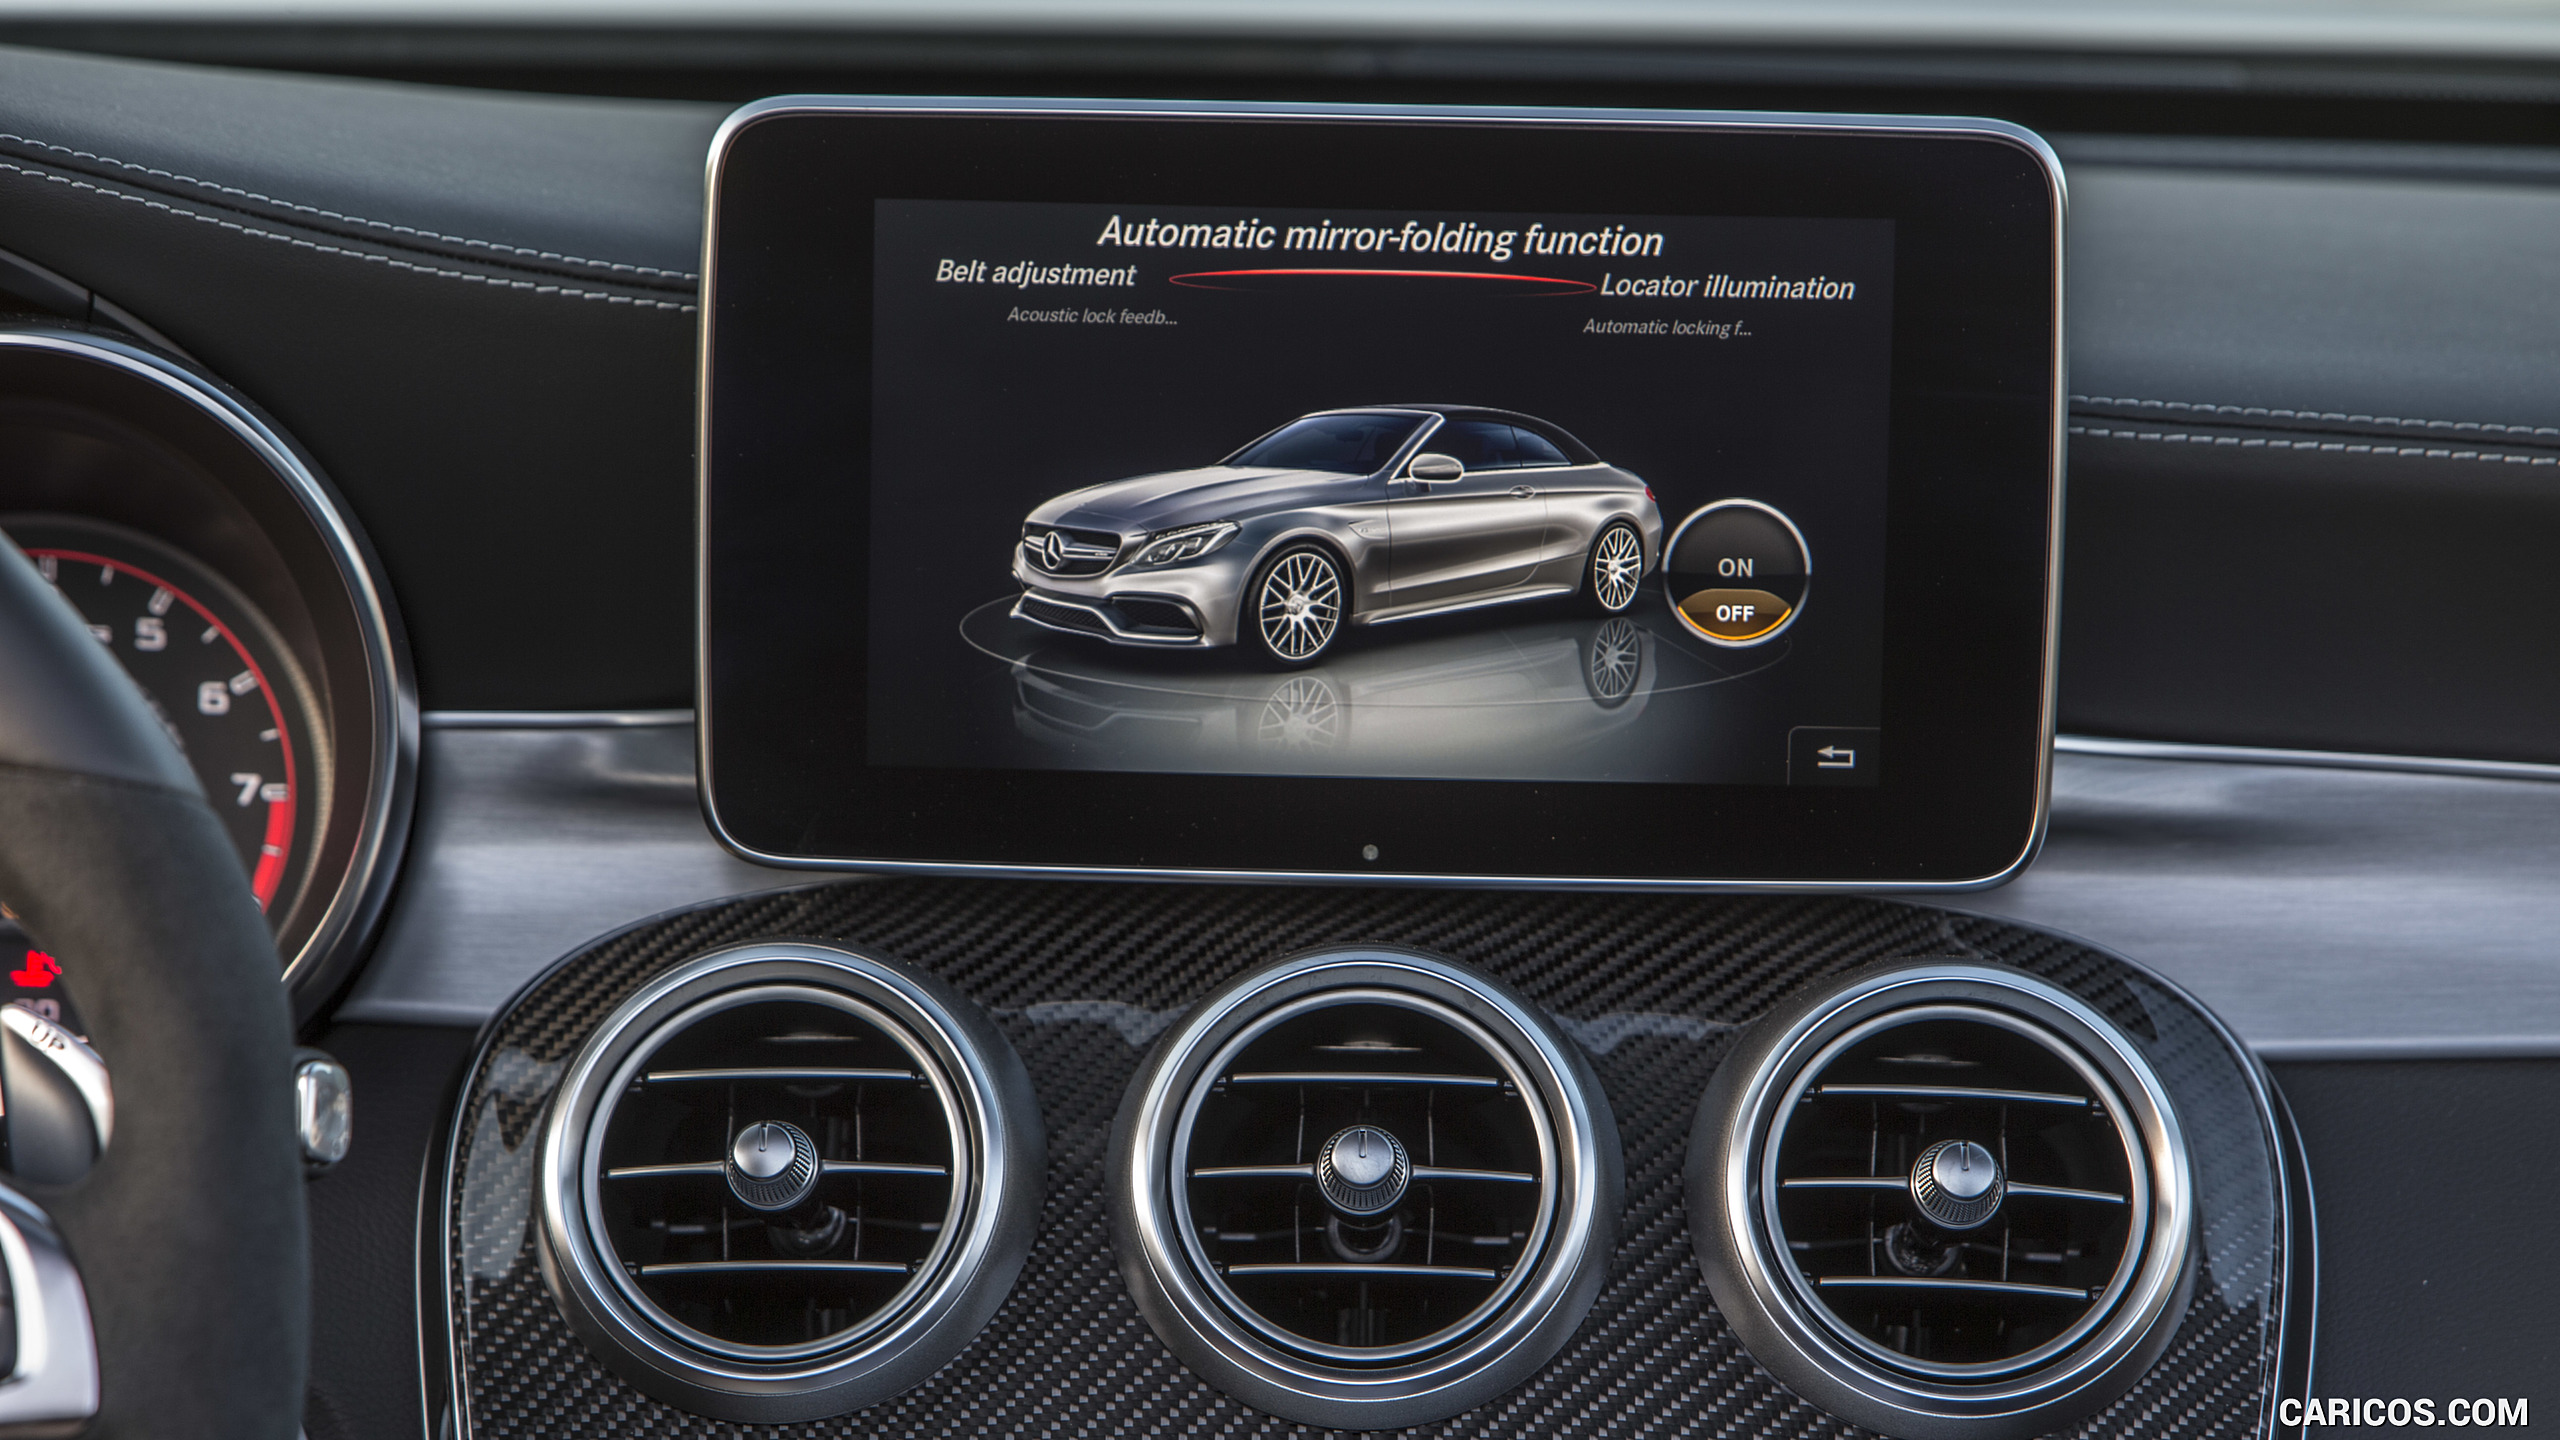 2017 Mercedes-AMG C63 S Cabriolet - Infotainment Screen - Central Console, #161 of 222